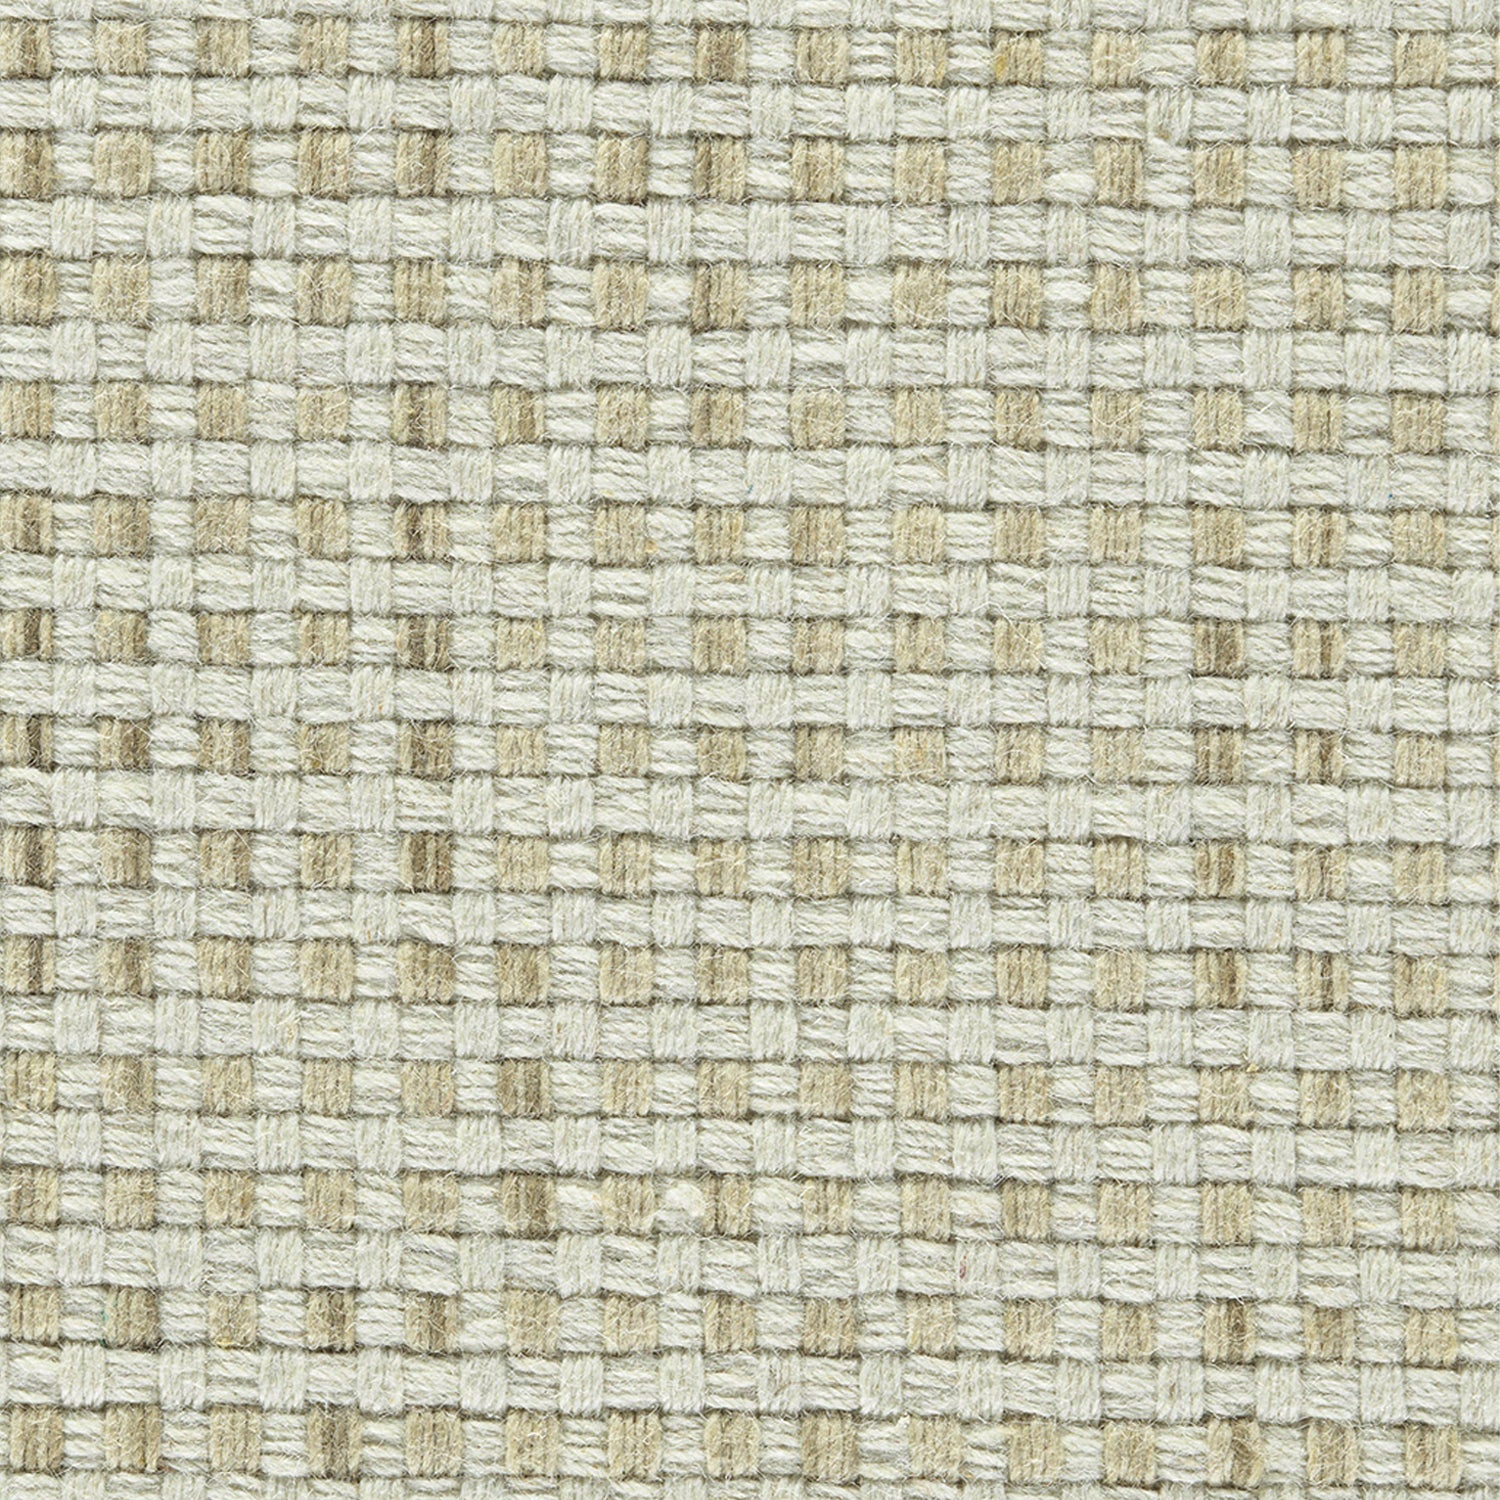 Wool broadloom carpet swatch in a flat grid weave in off-white and cream.